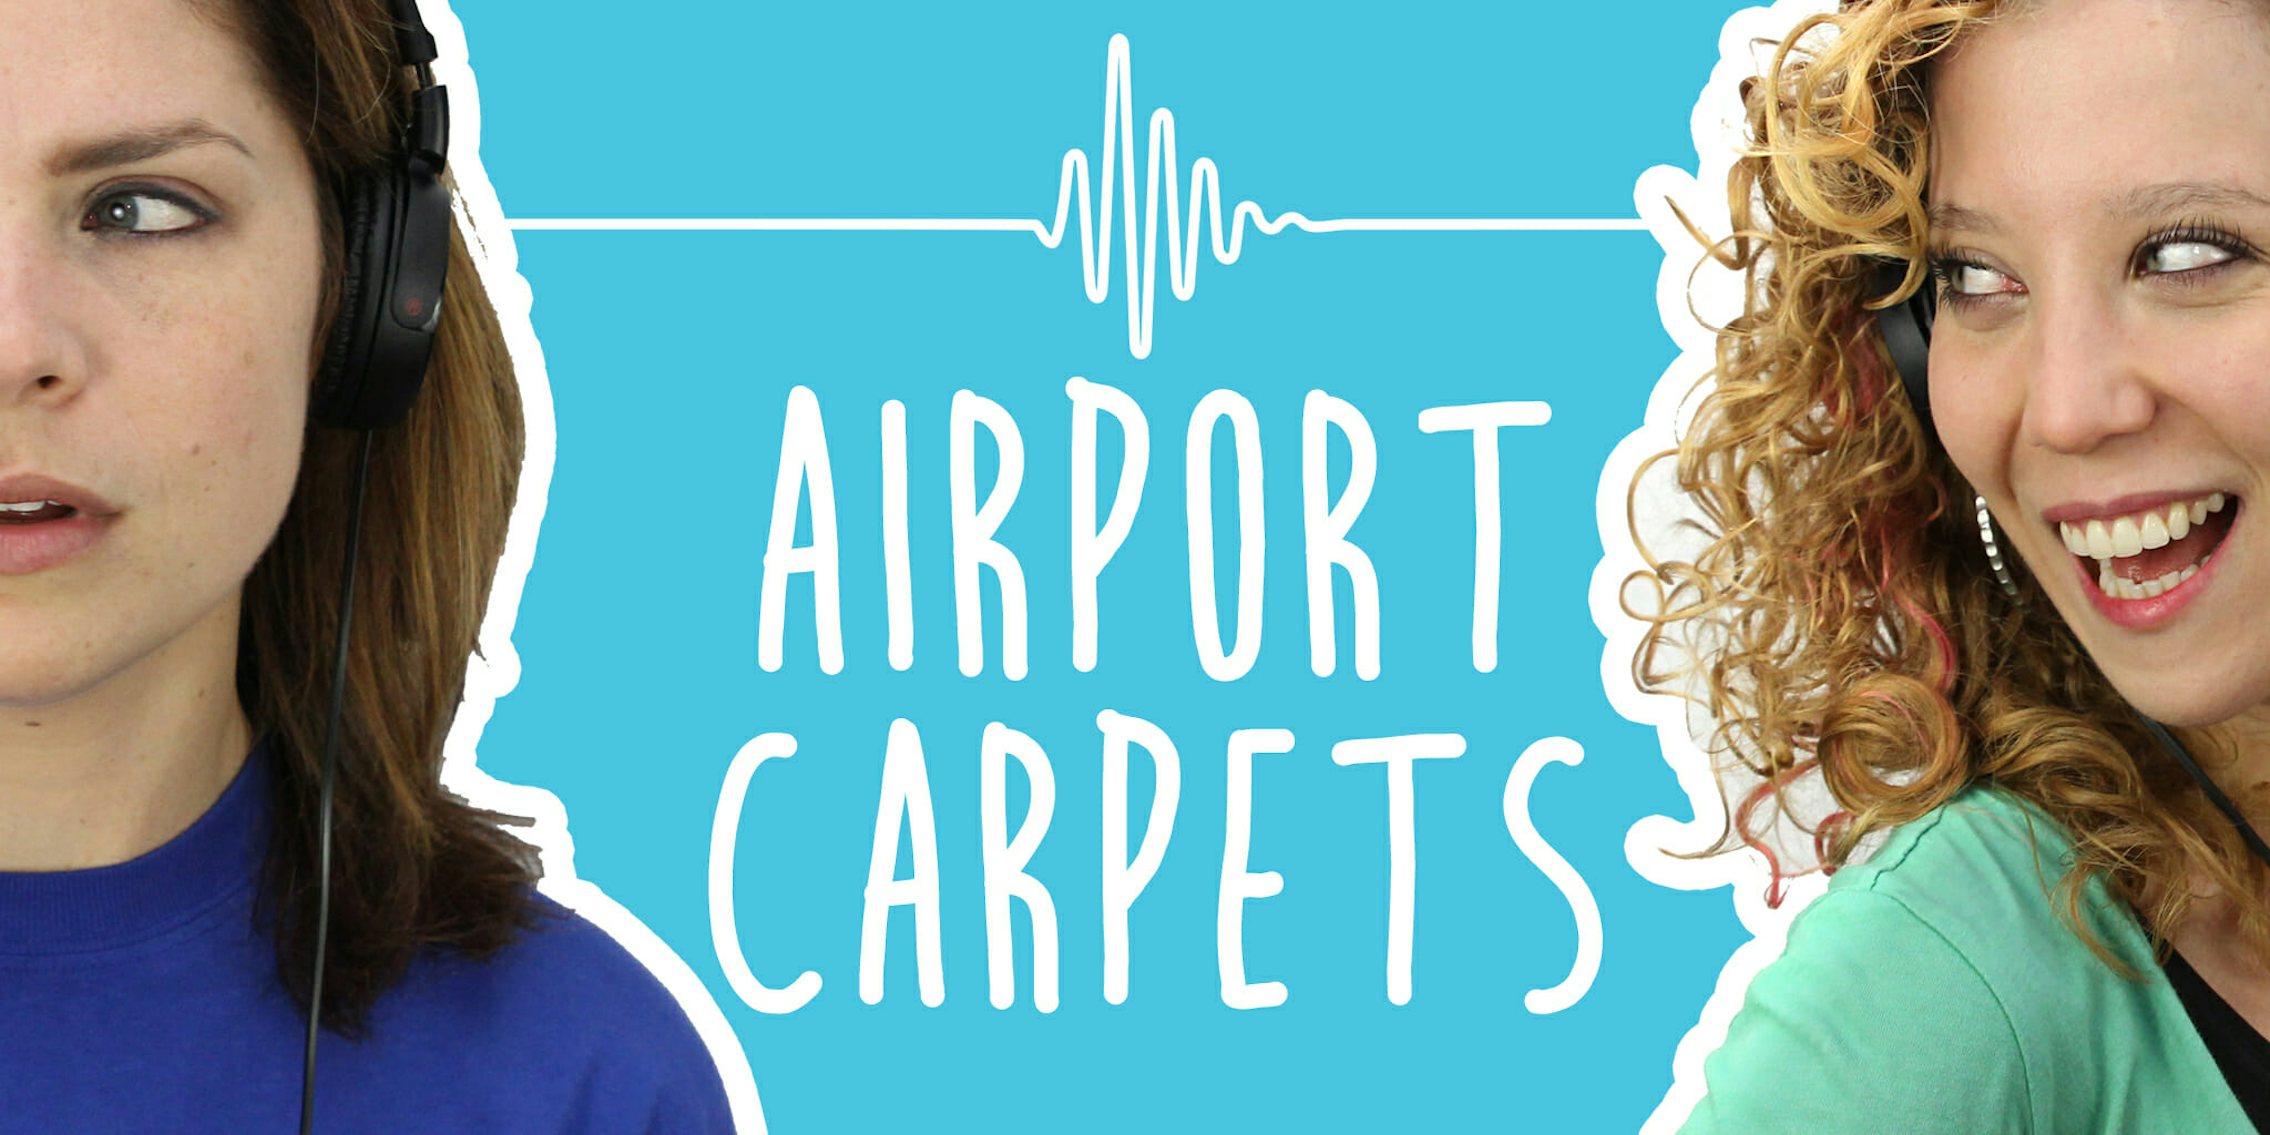 2 Girls 1 Podcast: Reviewing Airport Carpets